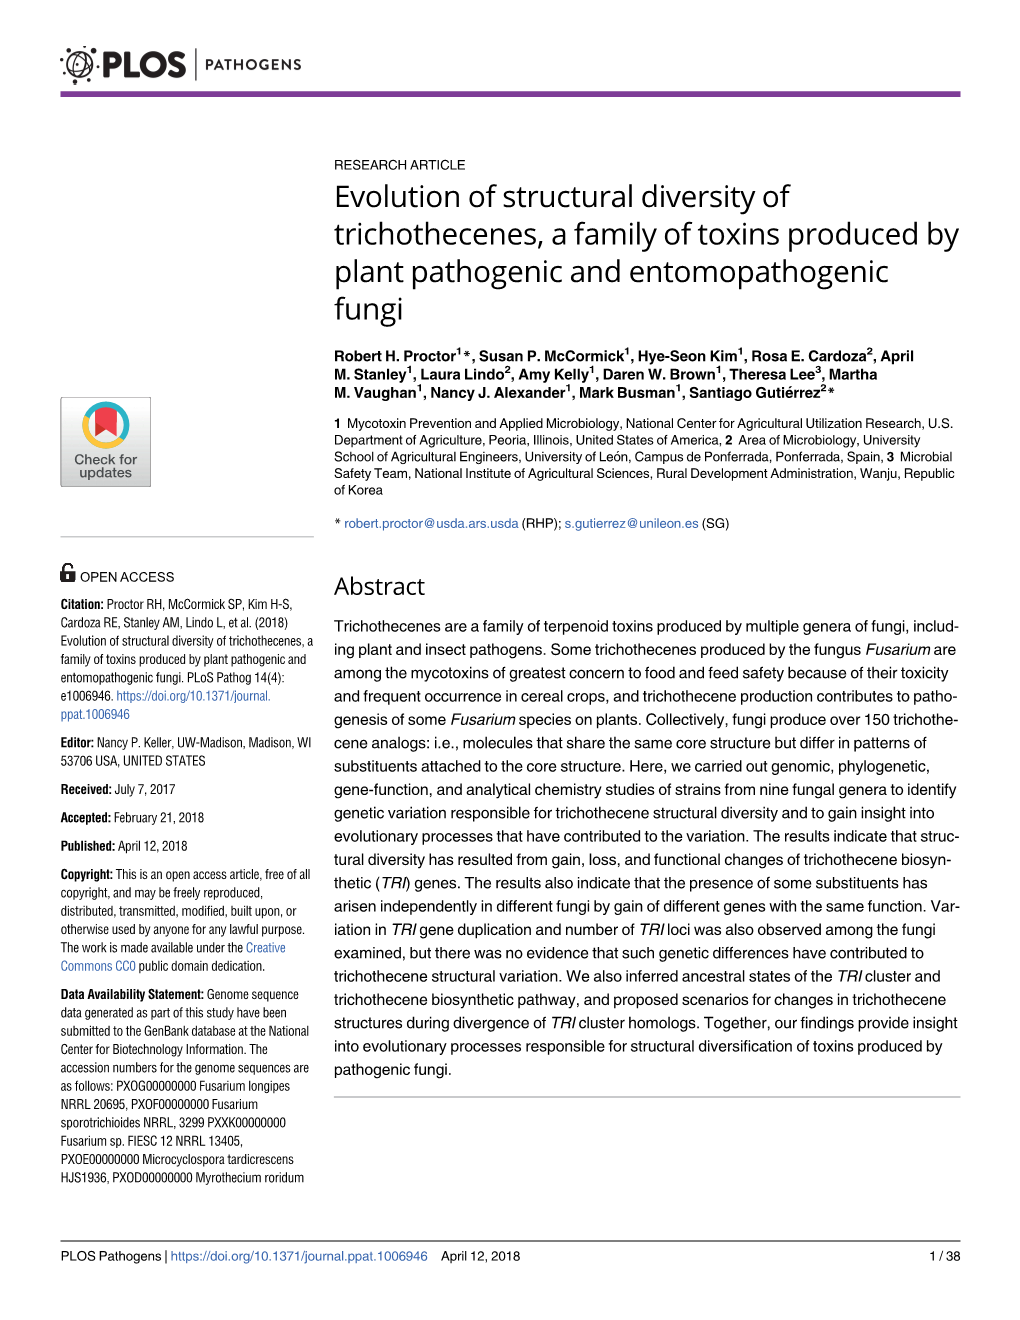 Evolution of Structural Diversity of Trichothecenes, a Family of Toxins Produced by Plant Pathogenic and Entomopathogenic Fungi